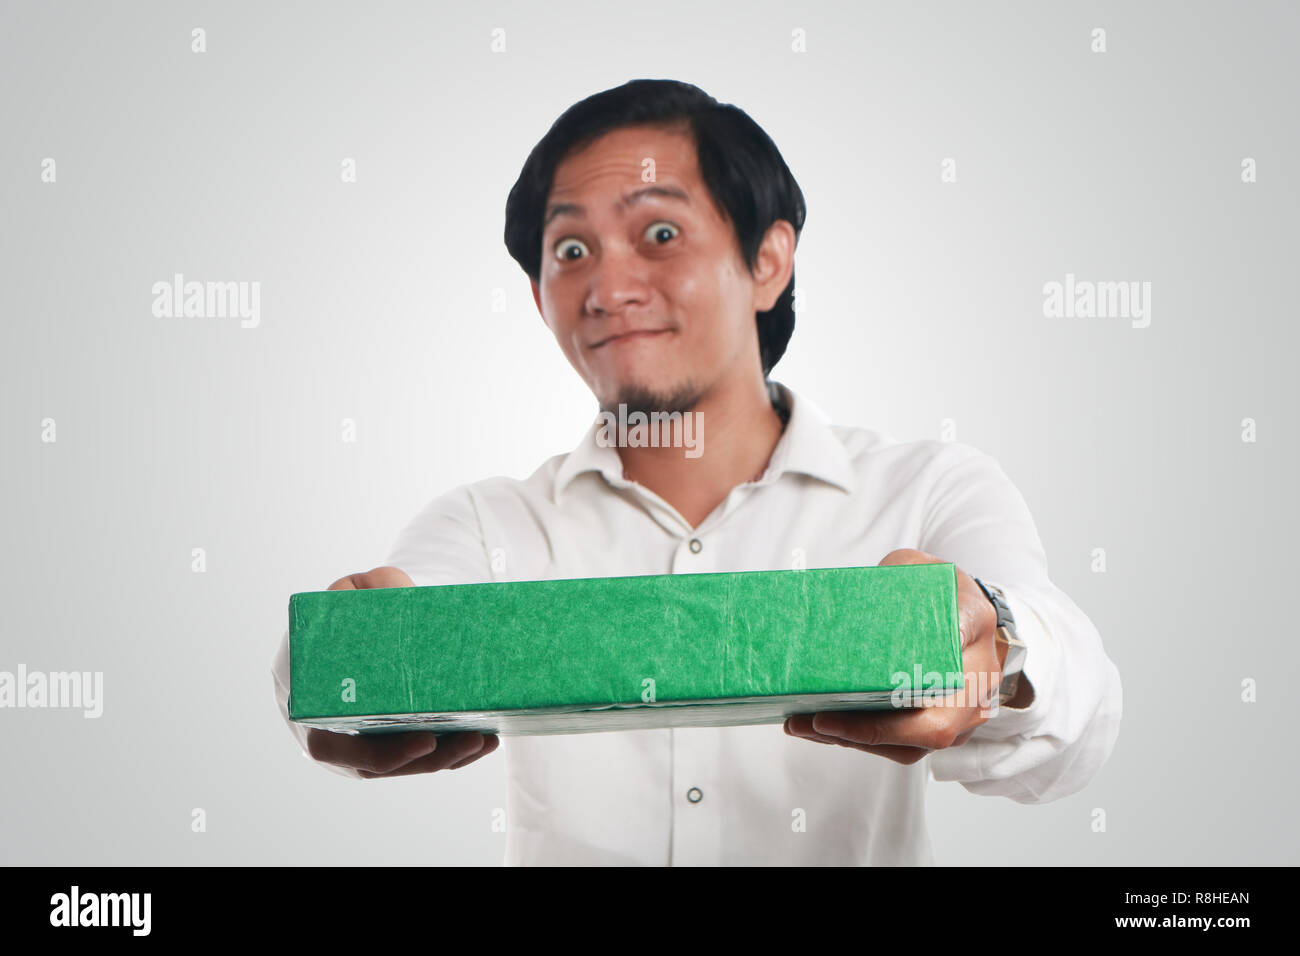 Photo image portrait of a funny young Asian man smiling happily with big eyes opened while giving green gift package box Stock Photo